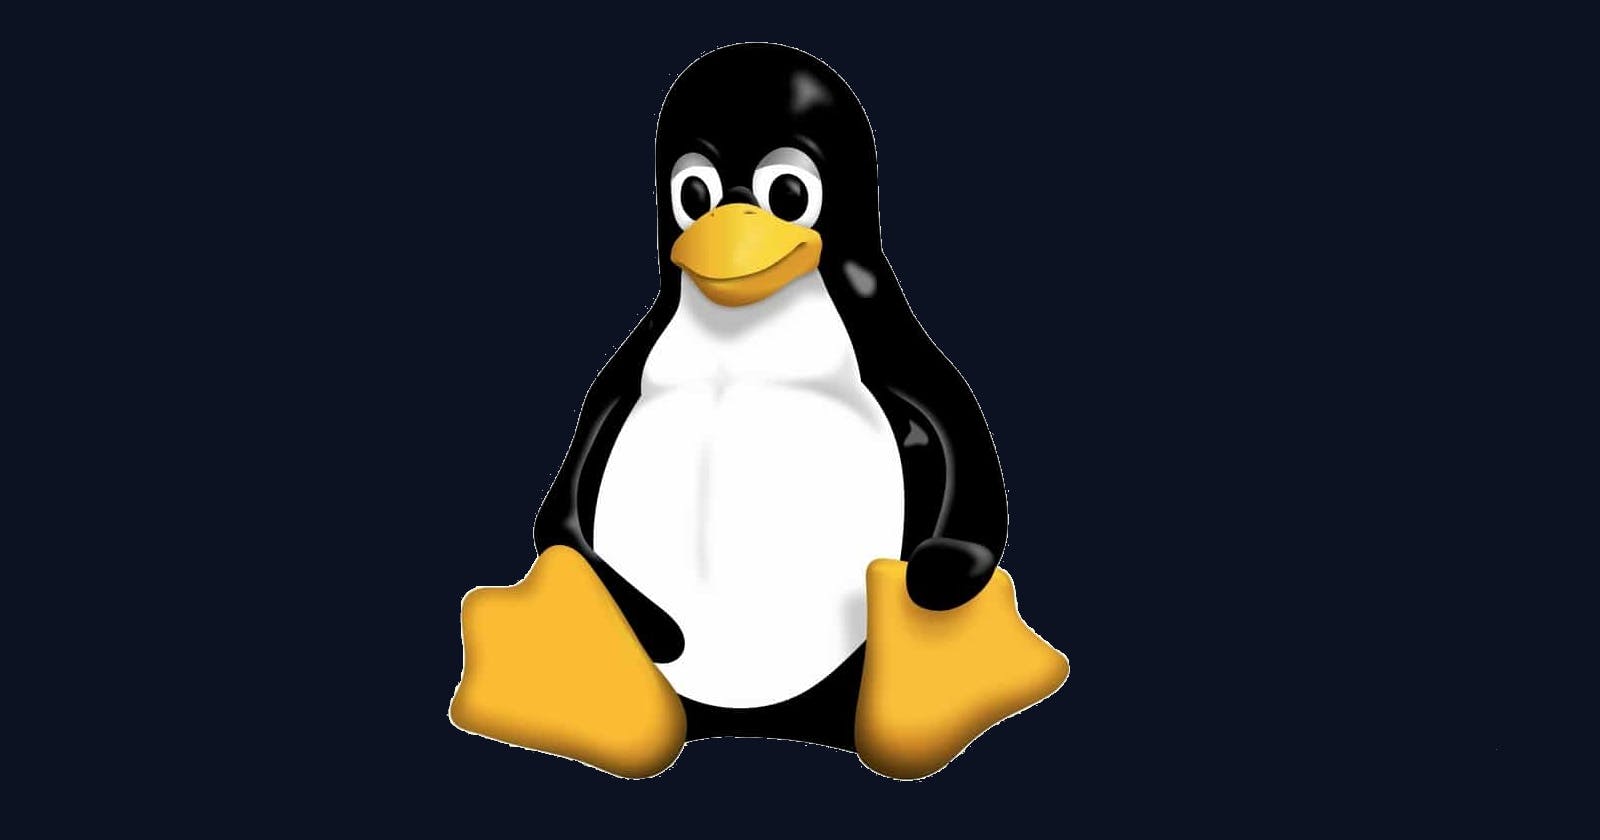 My Linux Experience